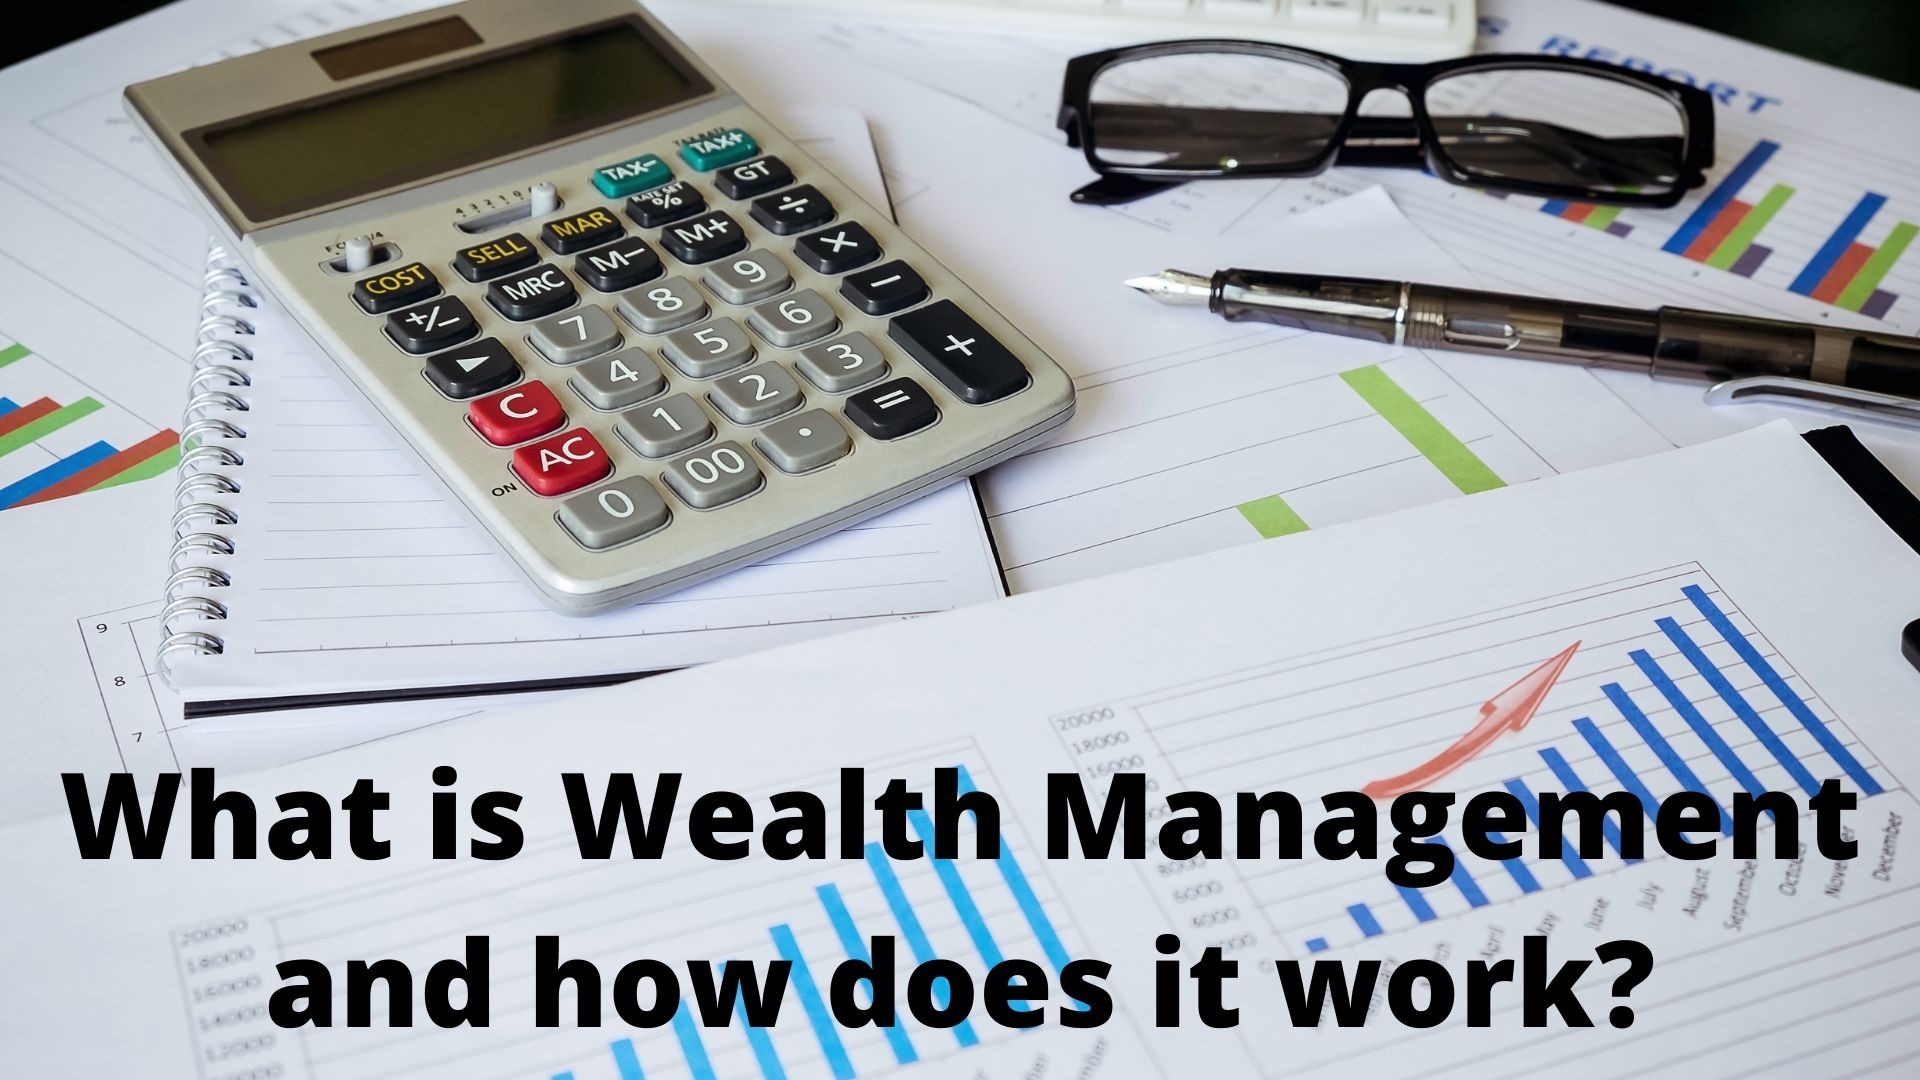 What is Wealth Management and how does it work?